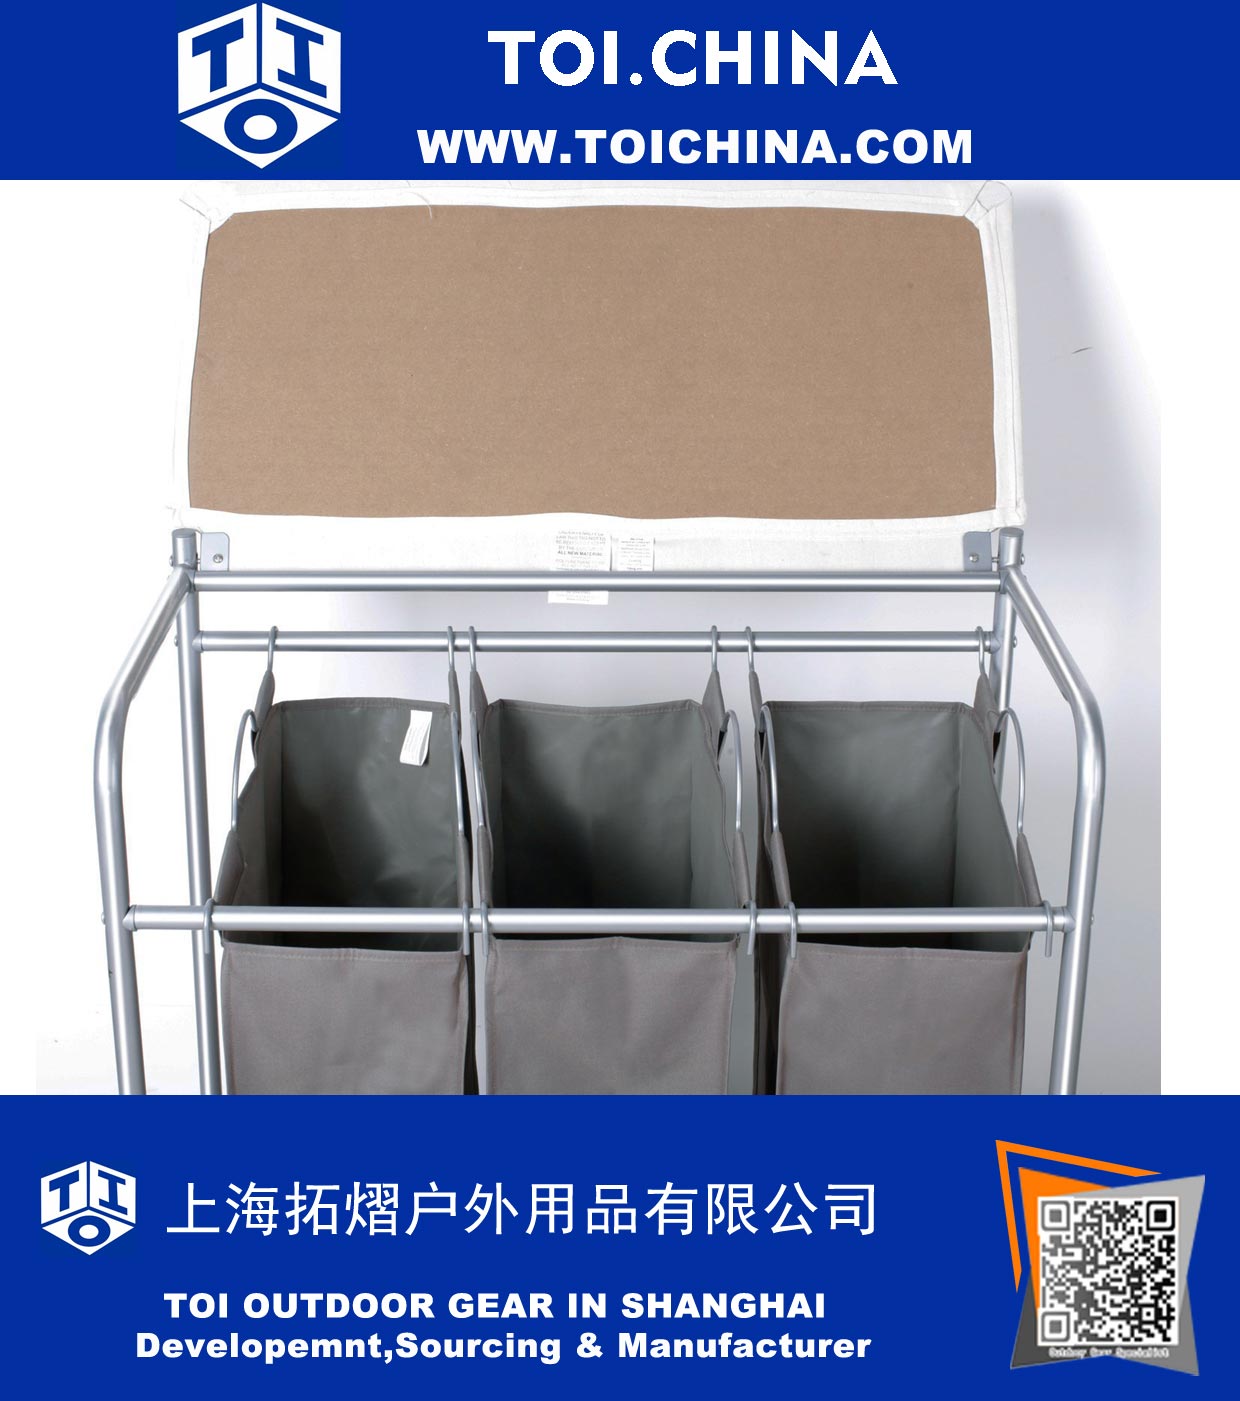 Foldable Laundry Sorter with Ironing Board